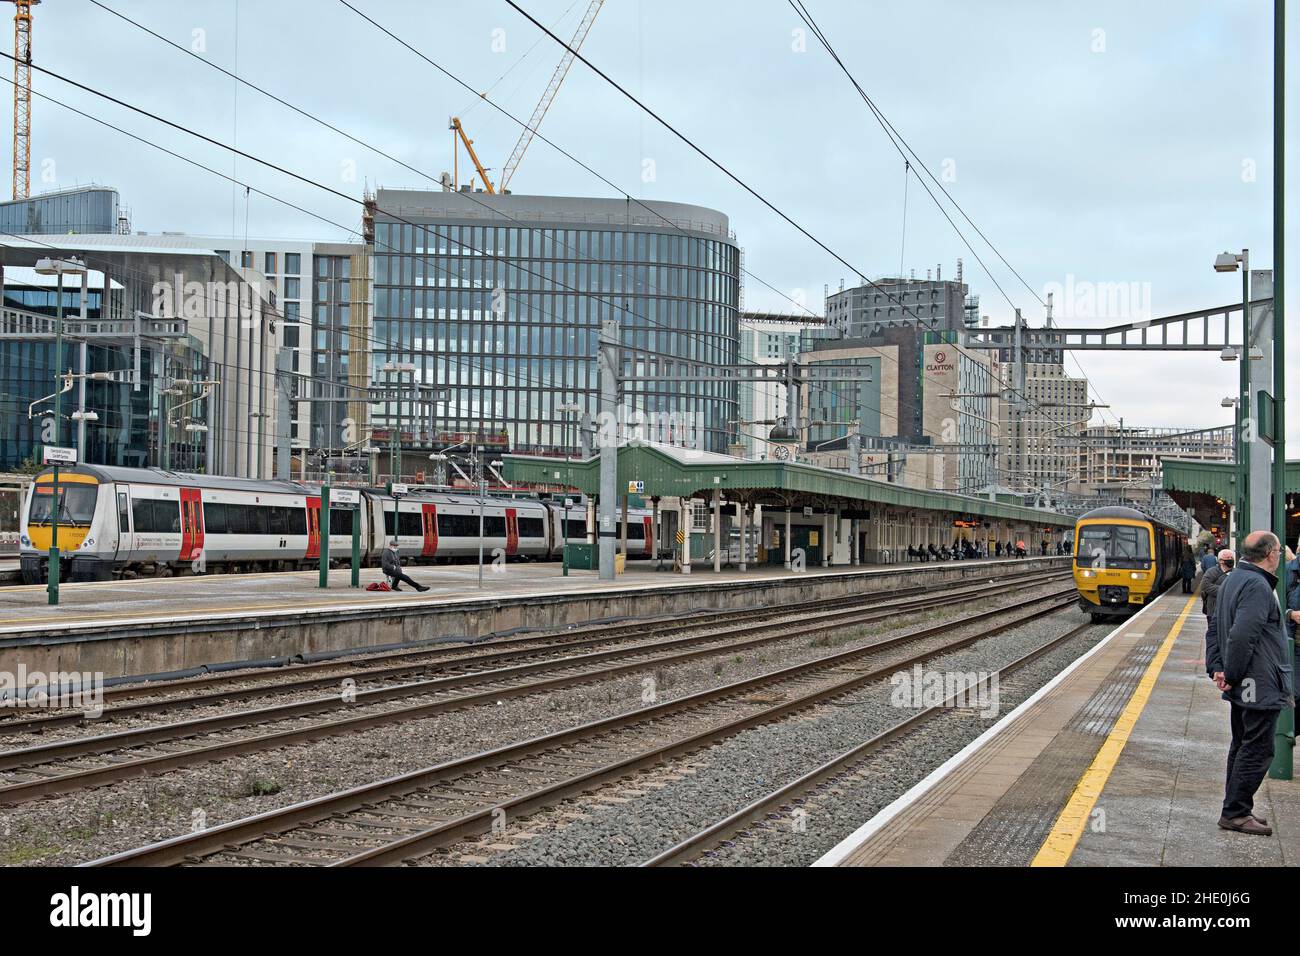 Cardiff Central Railway Station, Wales, United Kingdom The newly electrified infrastructure is evident Stock Photo